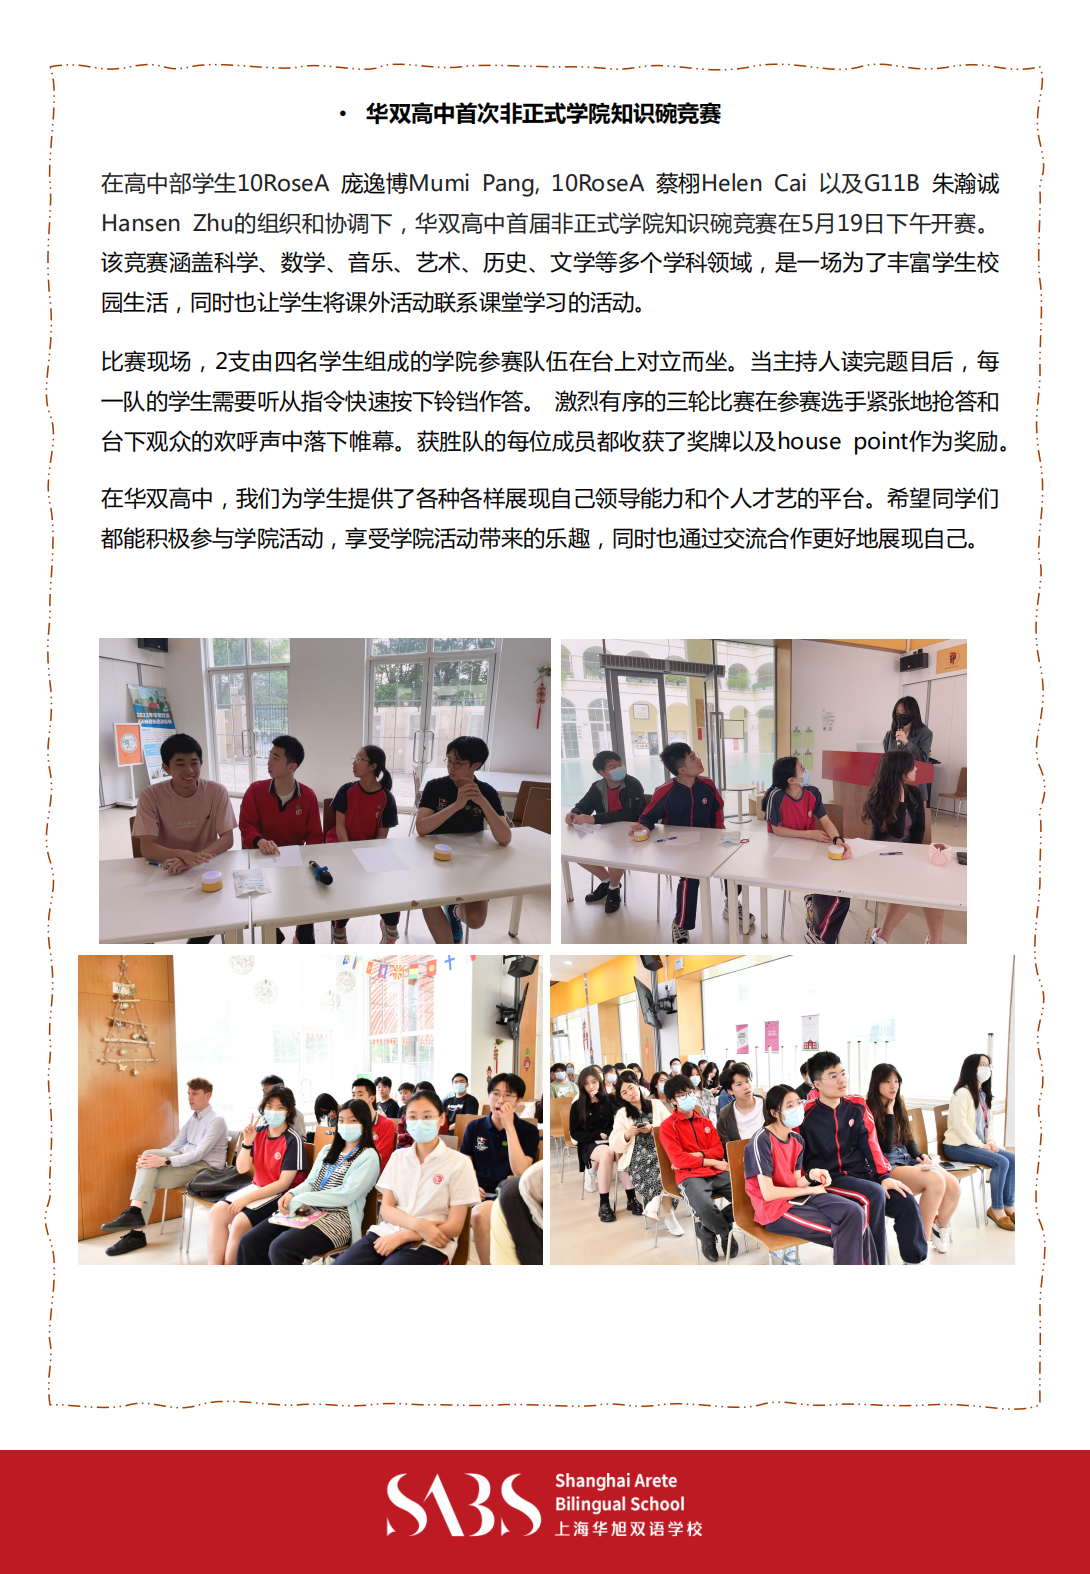 HS 7th Issue Newsletter pptx（Chinese）_03.png